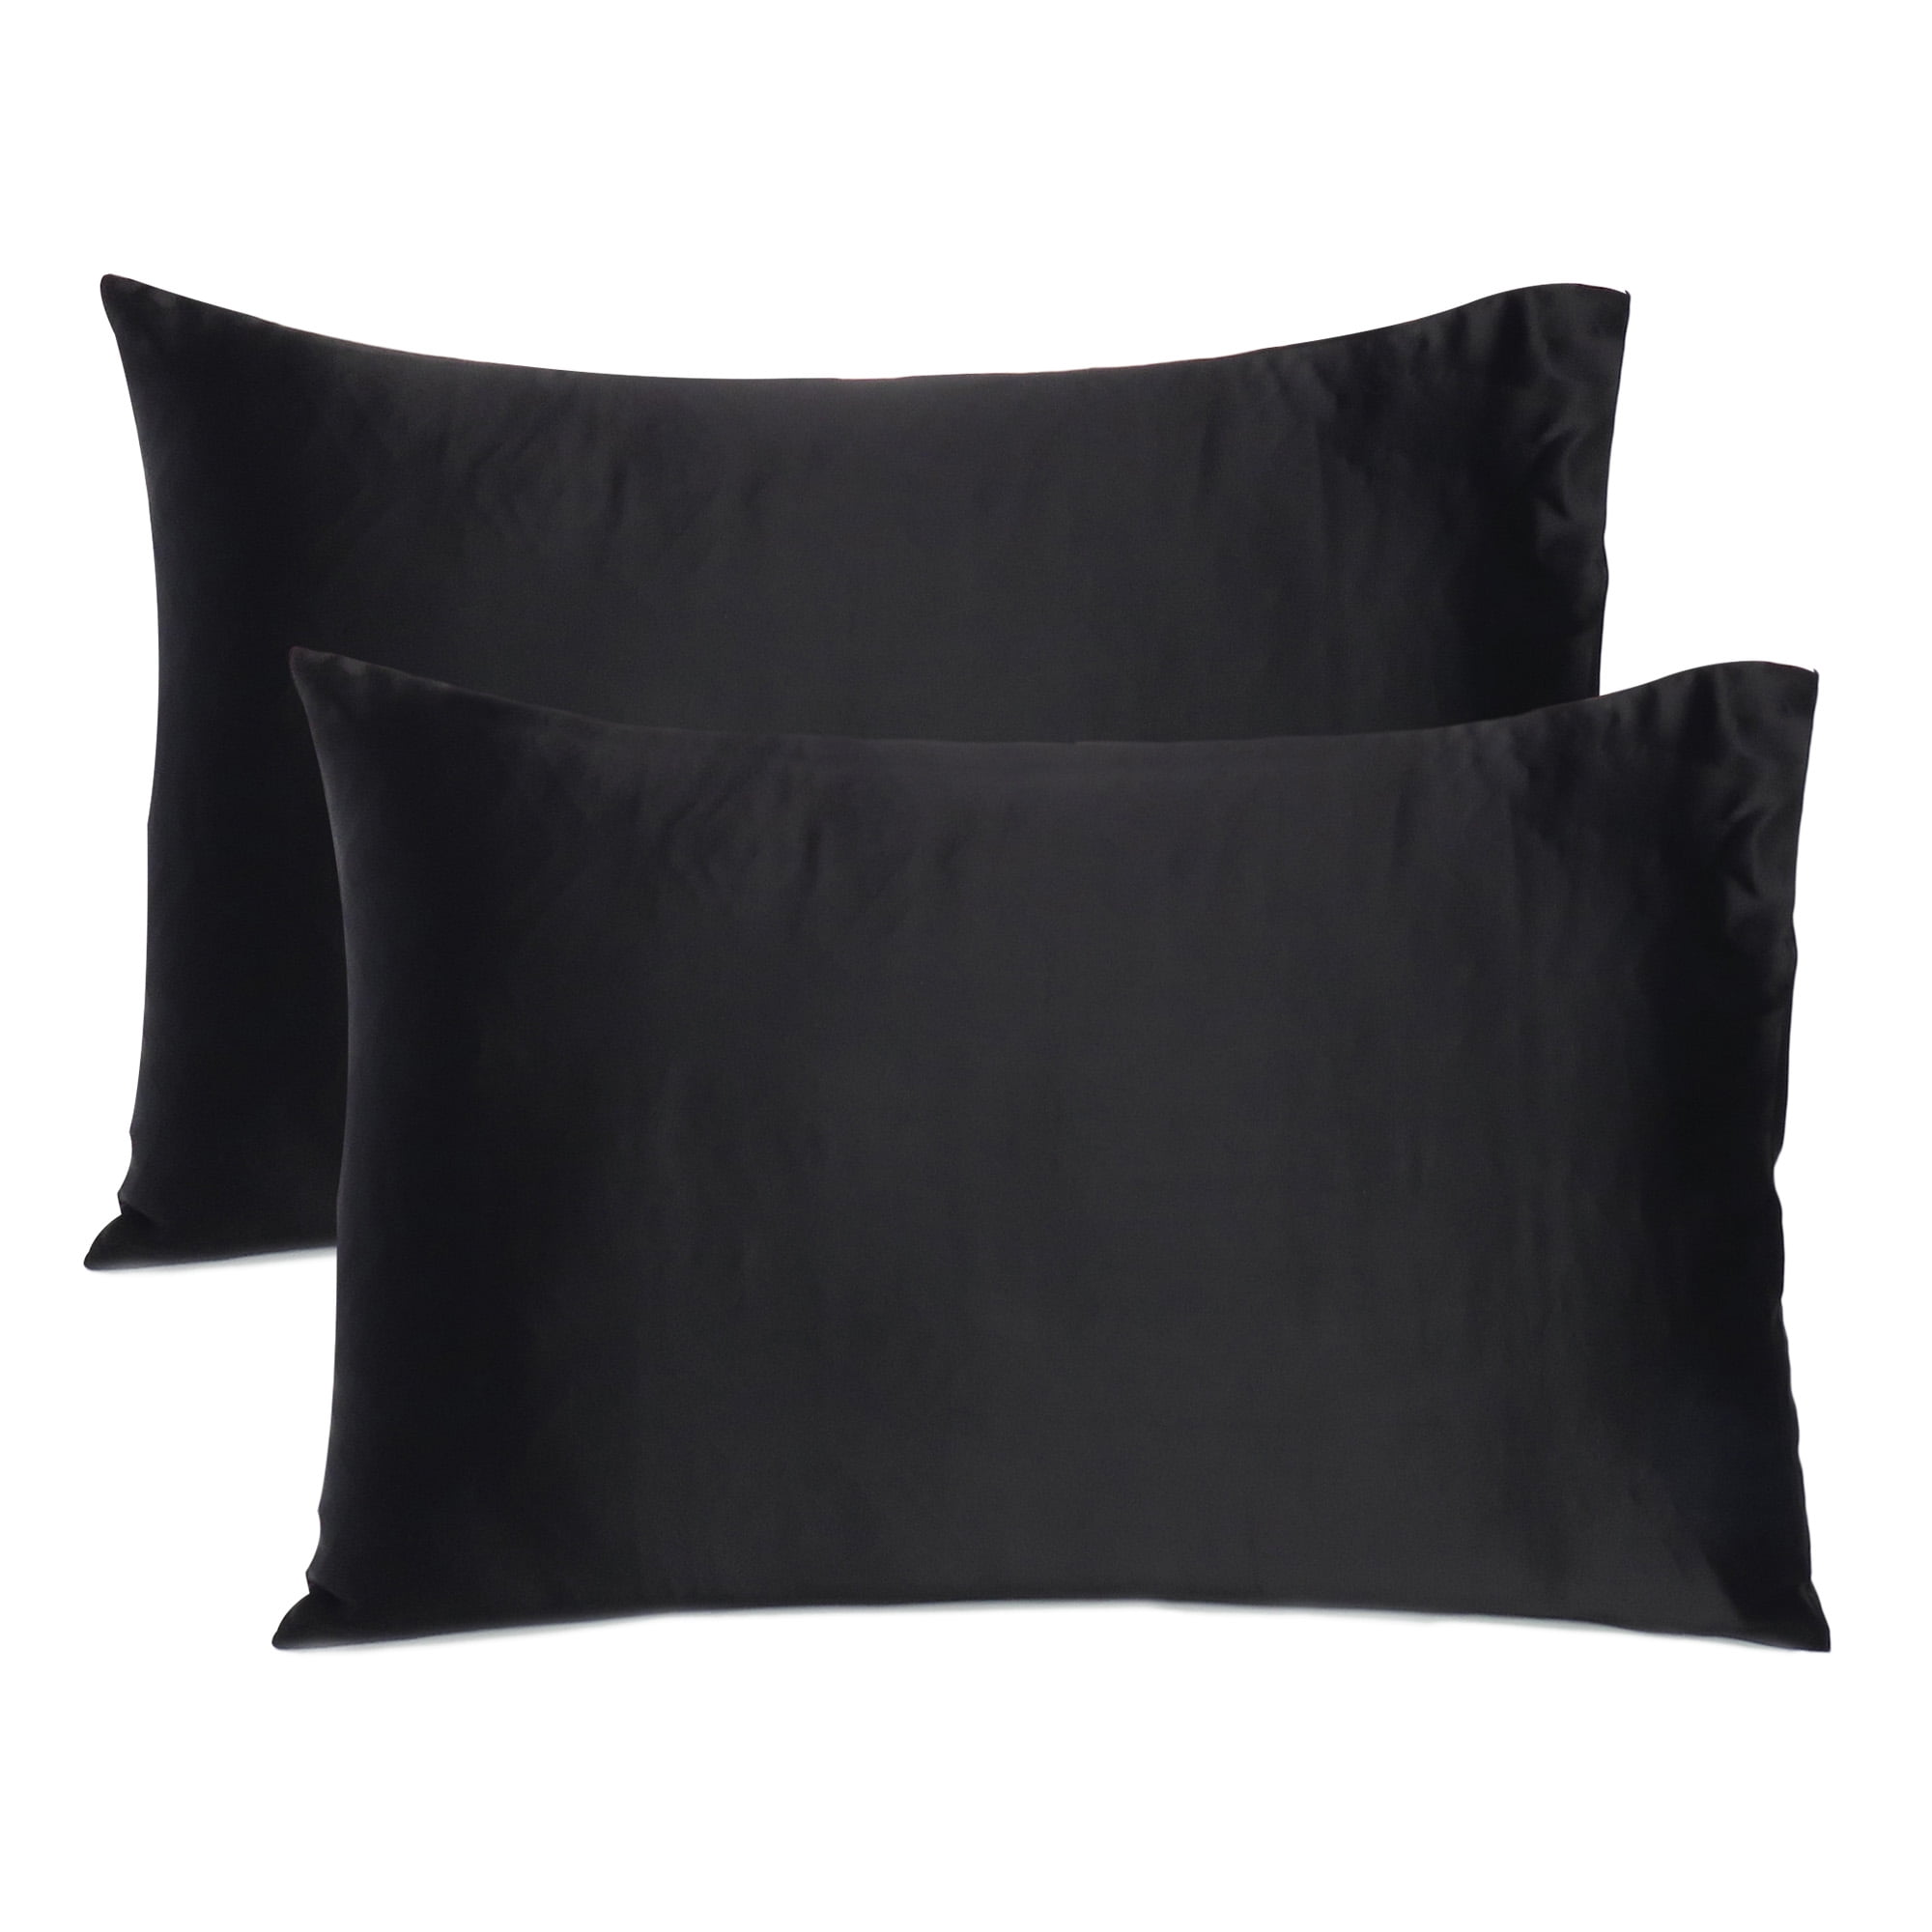 Details about   ENETIX Luxury Silk Satin Pillowcase for Hair and Skin 2-Pack with Gift Package, 